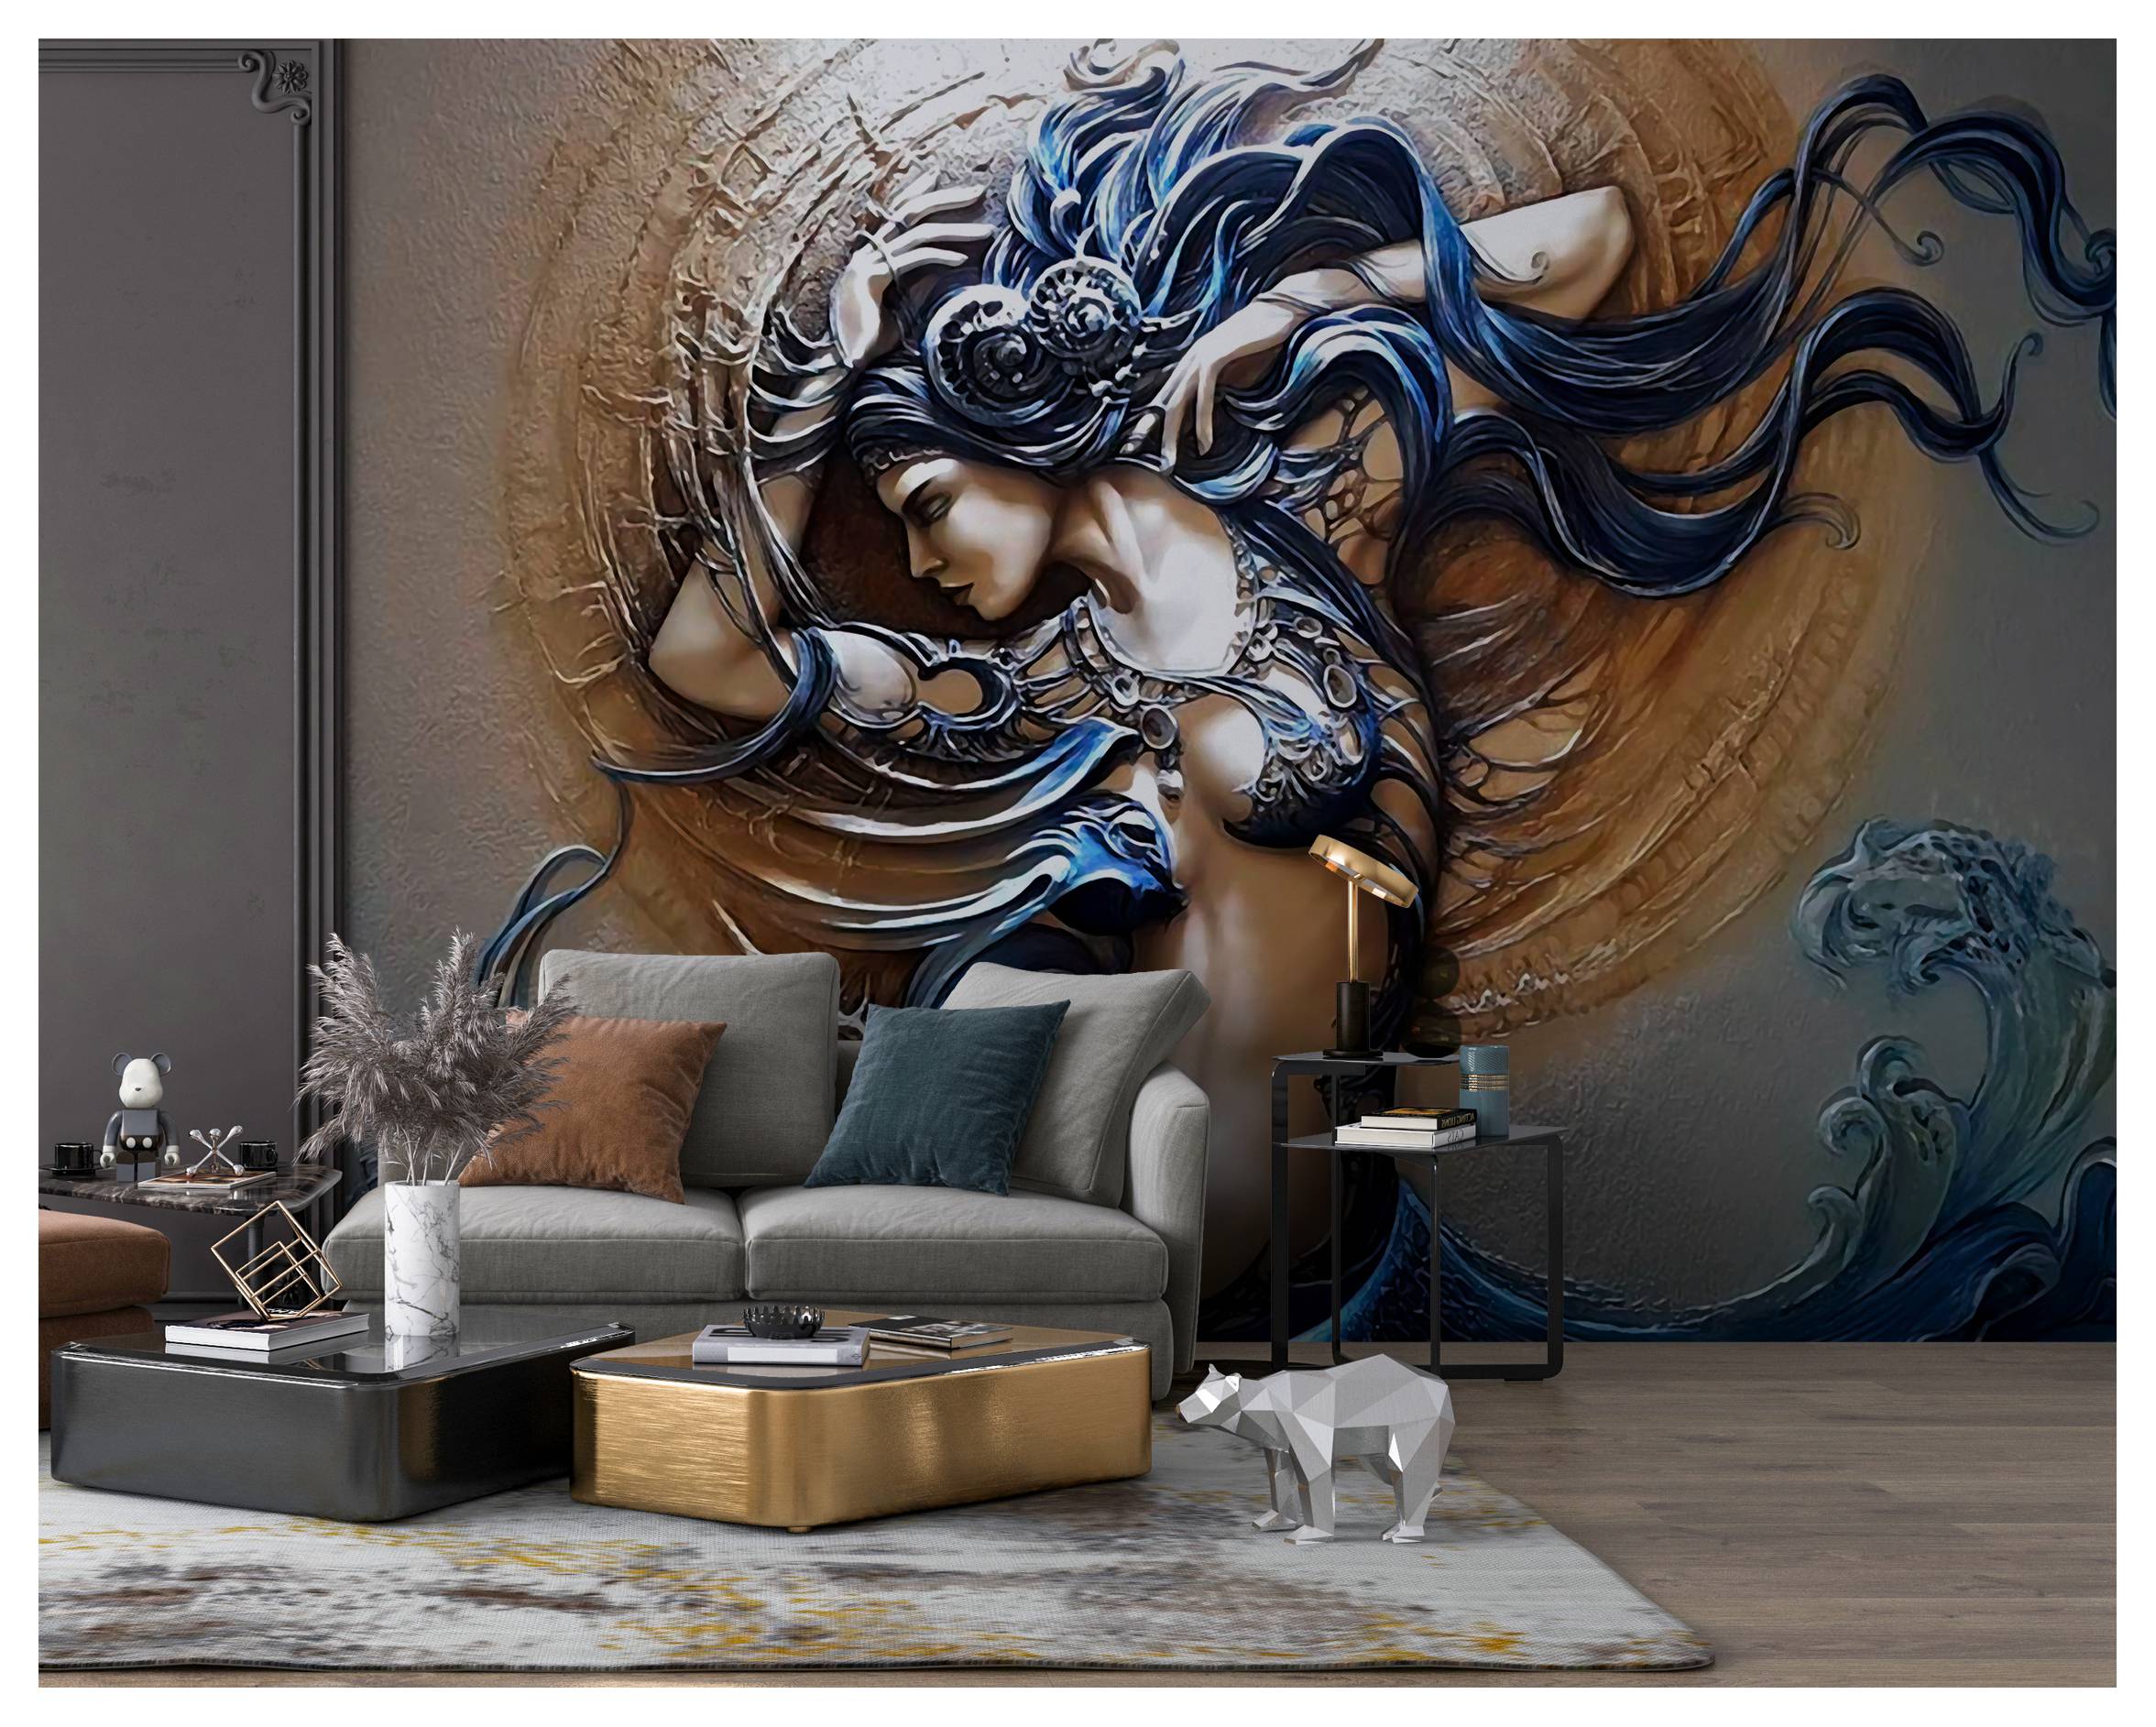 3D Mermaid Seabed N943 Wallpaper Wall Mural Removable Self-adhesive Sticker Amy 